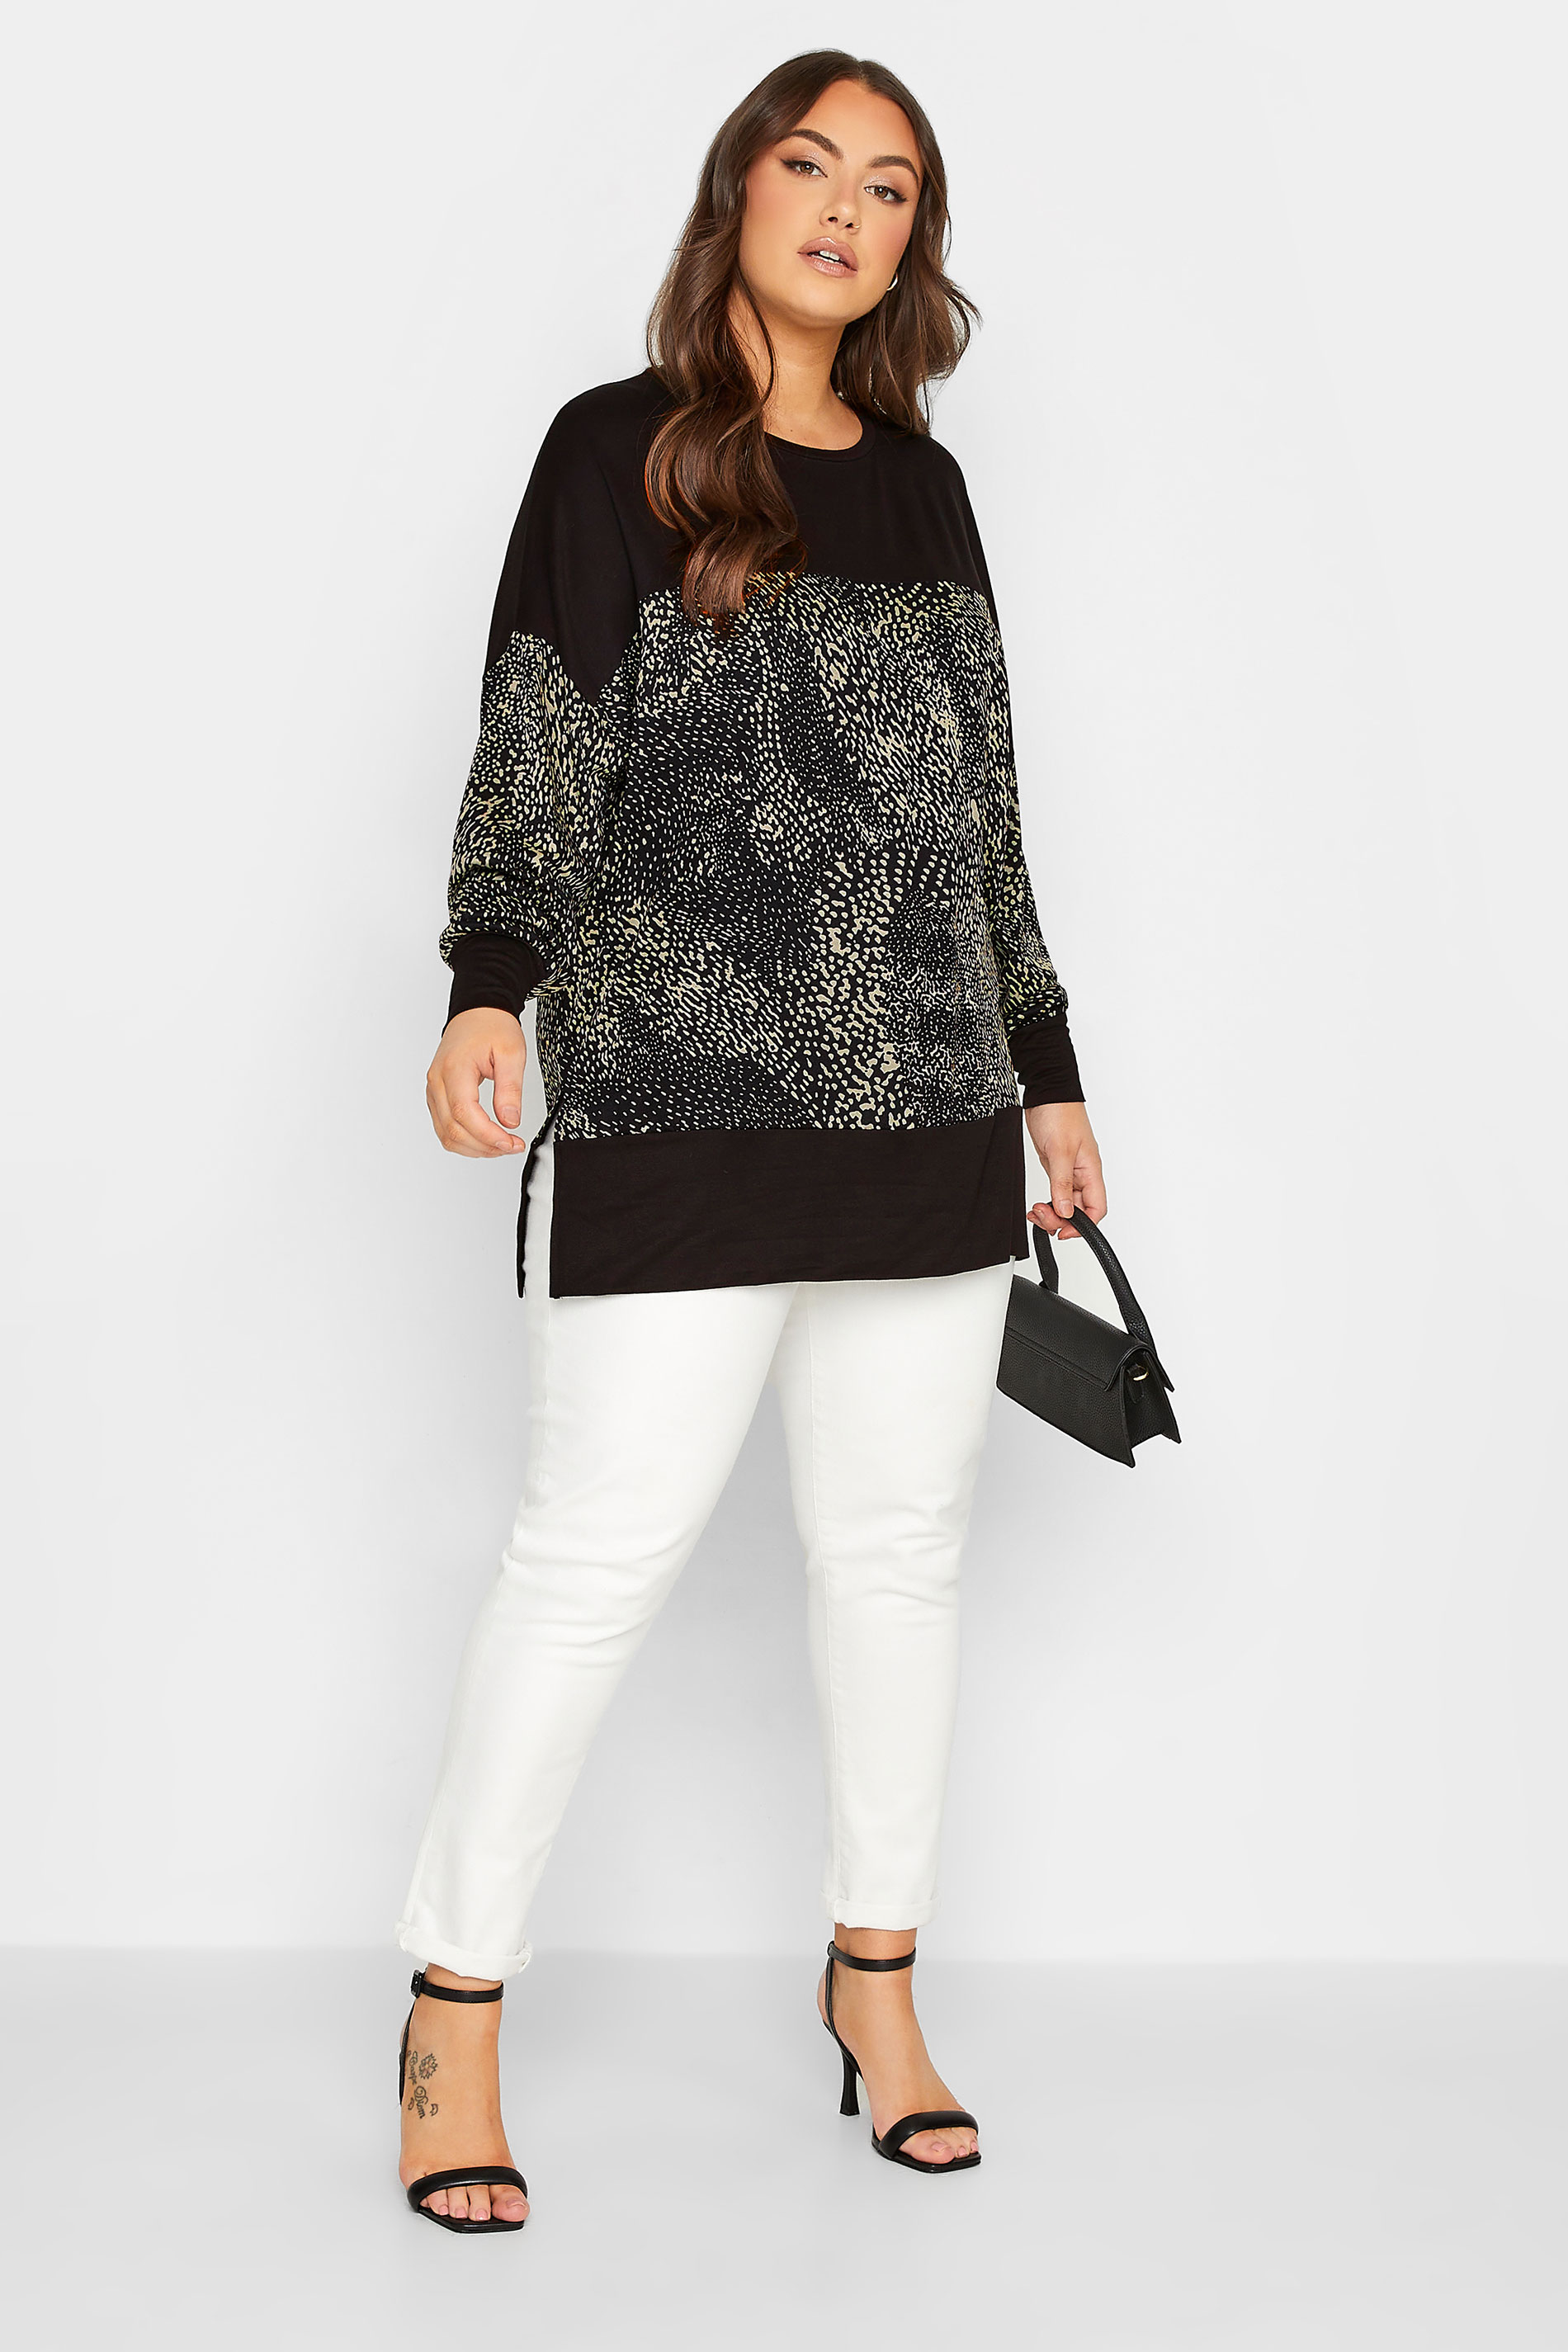 Plus Size Black Mixed Animal Print Long Sleeve Top | Yours Clothing  2